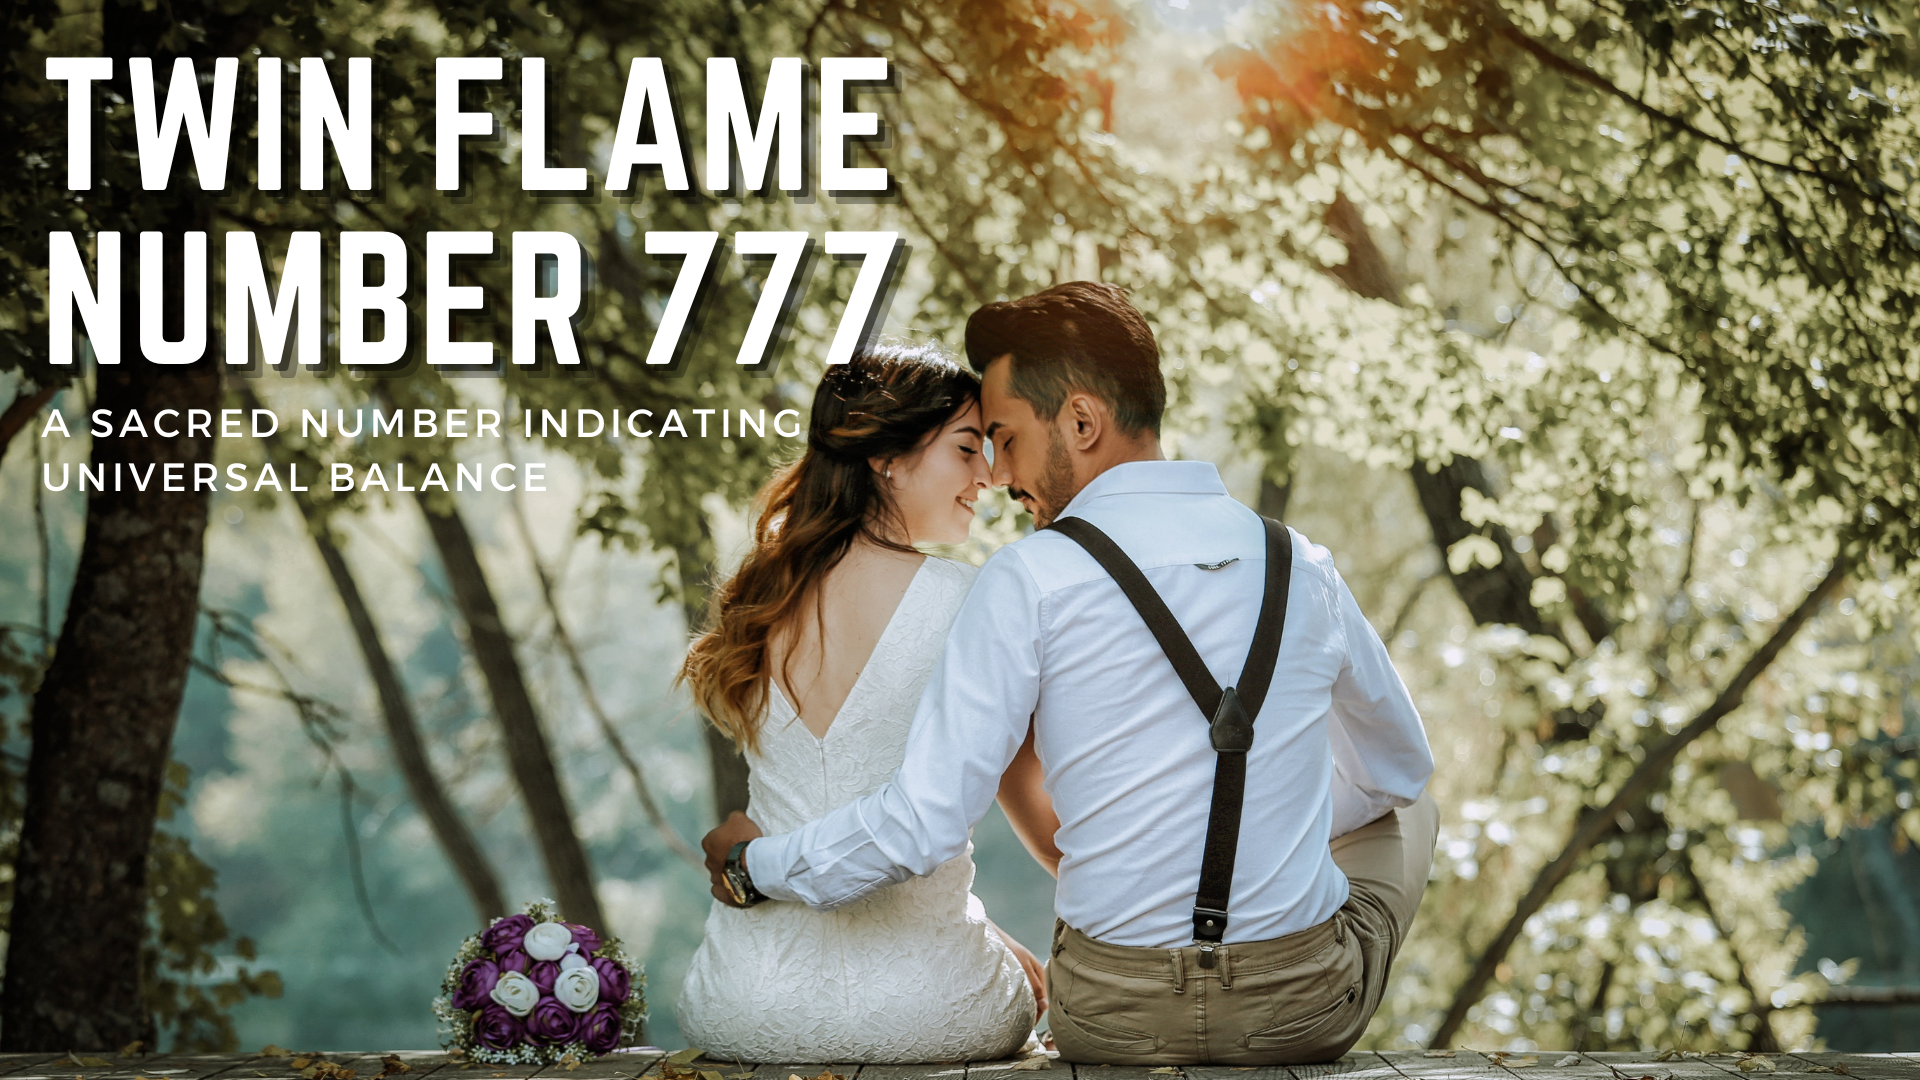 Twin Flame Number 777 - A Sacred Number Indicating Universal Balance